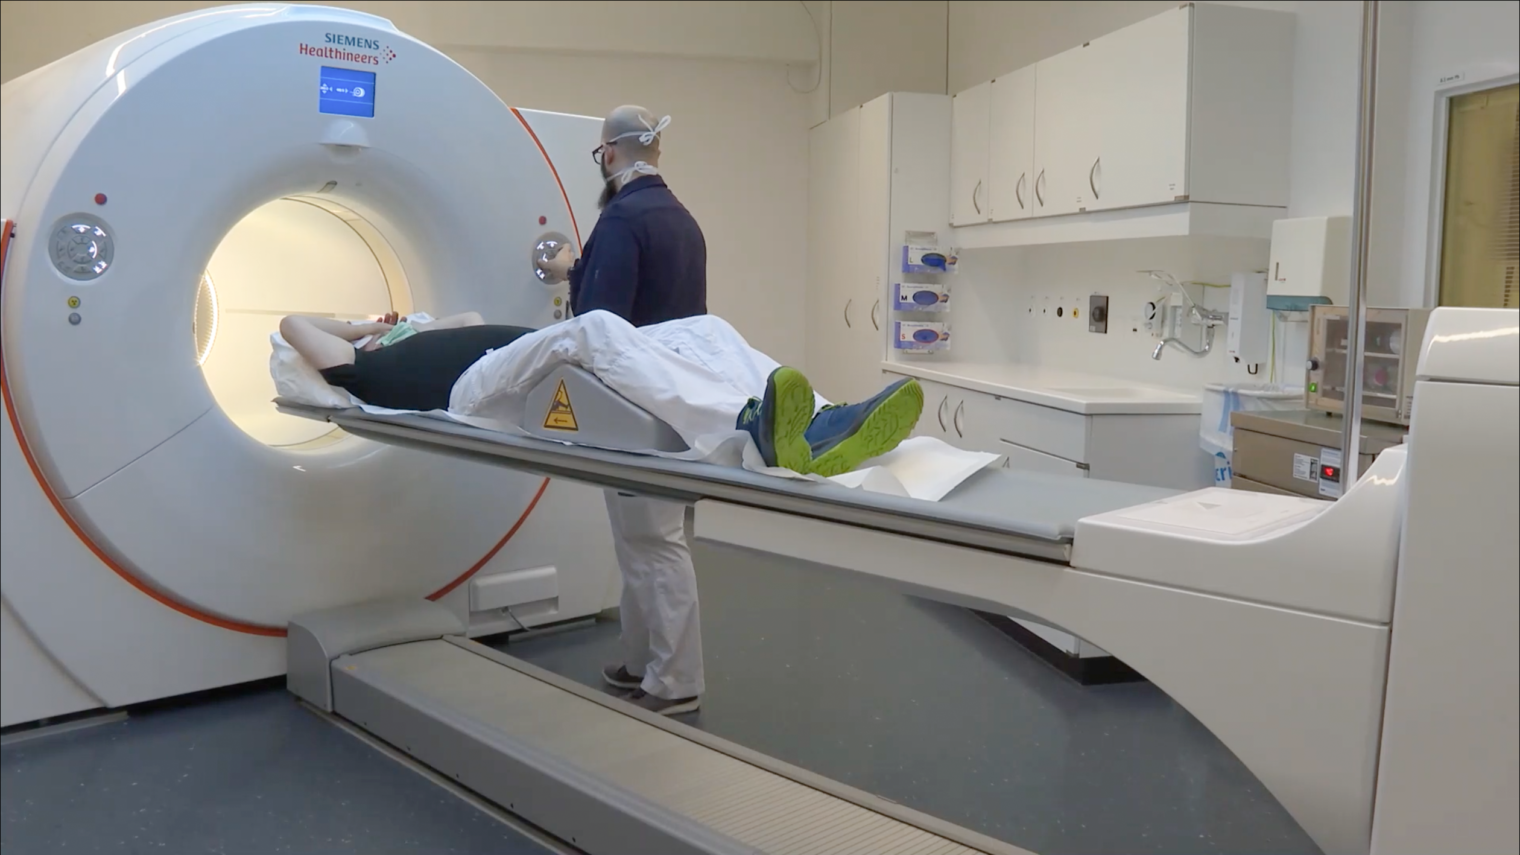 Demo of a total-body PET scan (Image credit Inselspital, Bern, Switzerland)